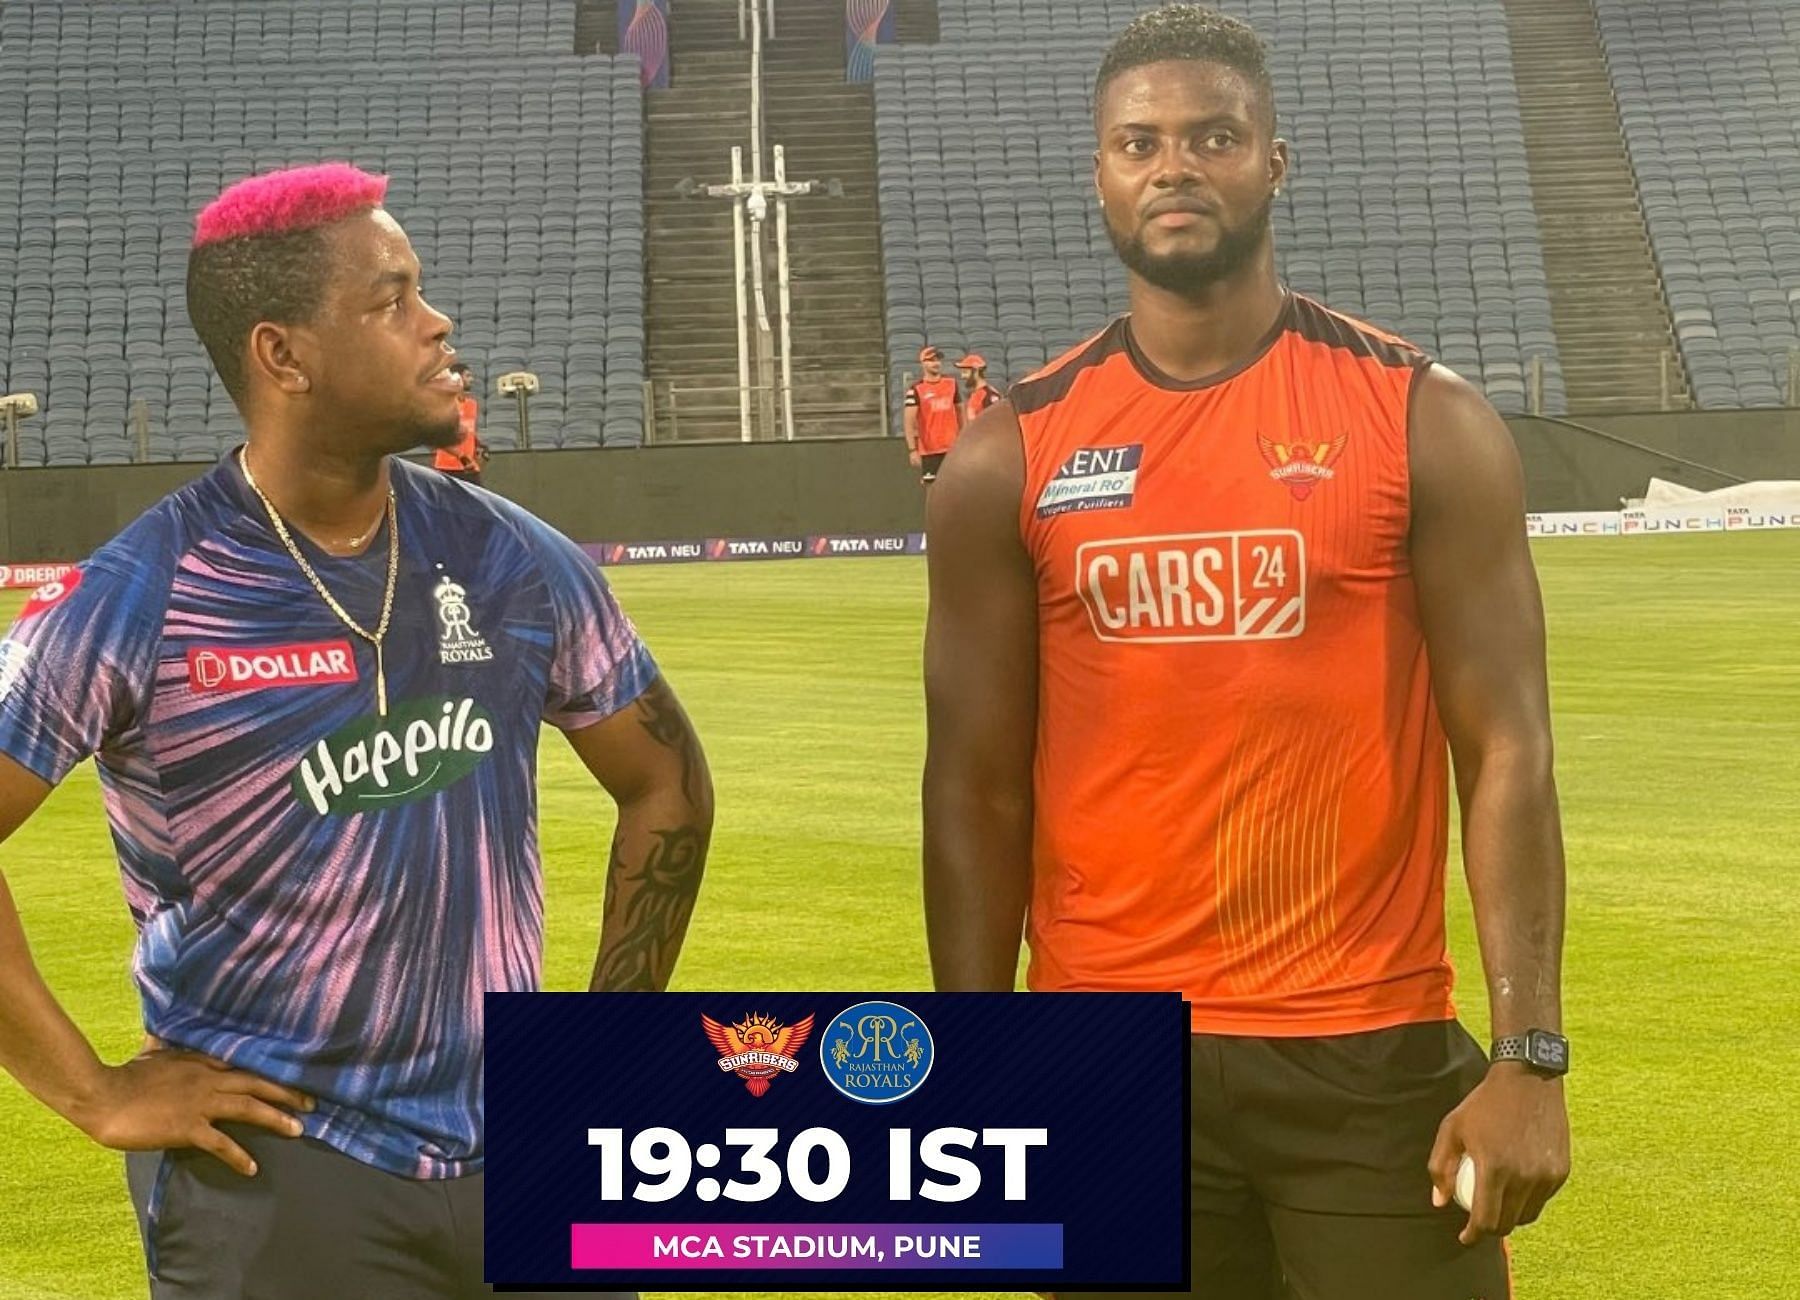 Sunrisers Hyderabad (SRH) will face the Rajasthan Royals (RR). Pic: SRH/ Twitter